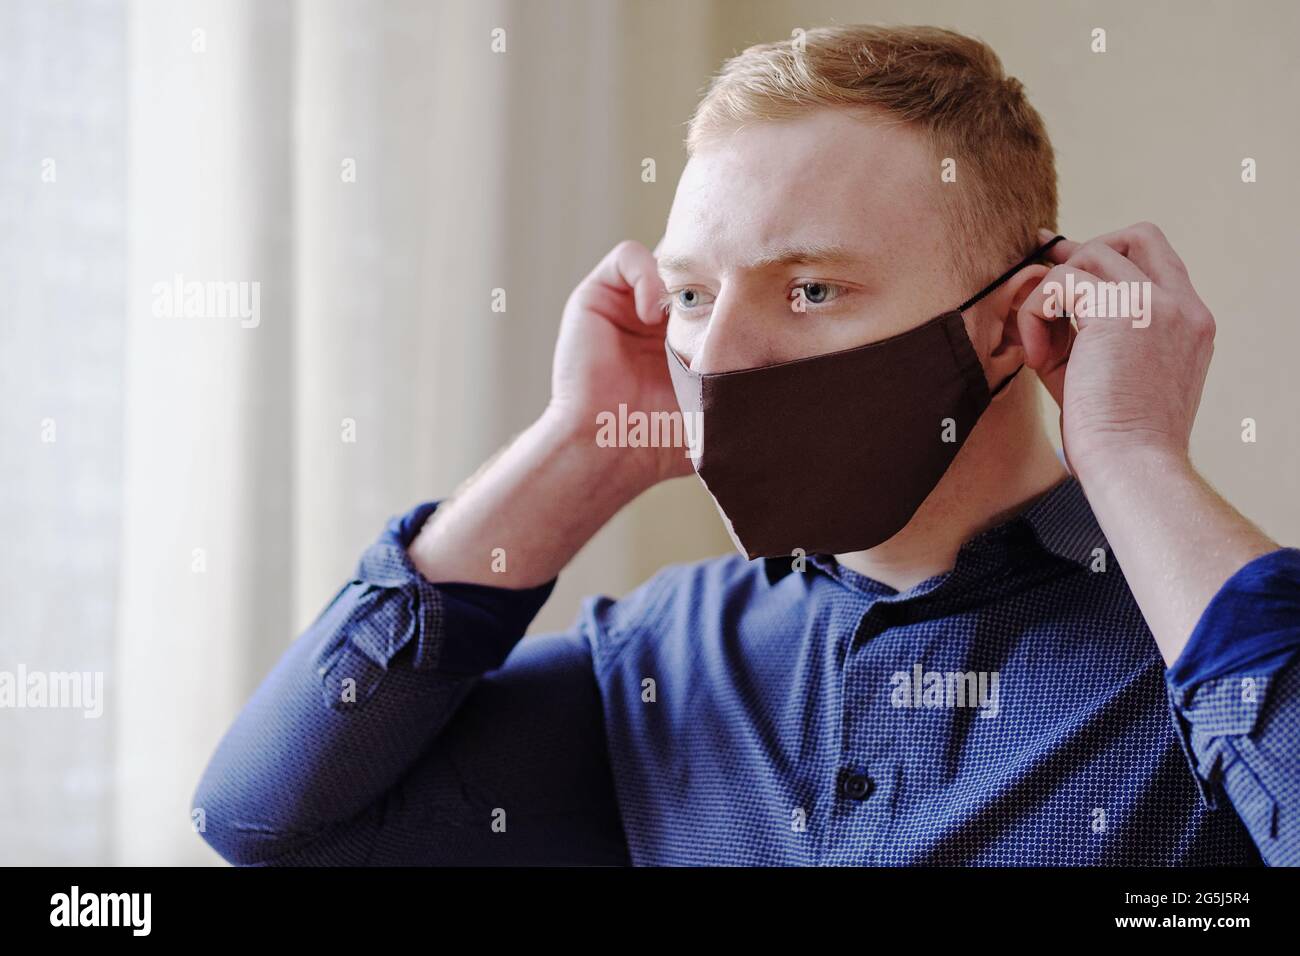 A young man puts on a protective mask on his face as protection against coronavirus - A mask on a man's face during the COVID-19 epidemic - Concept of Stock Photo